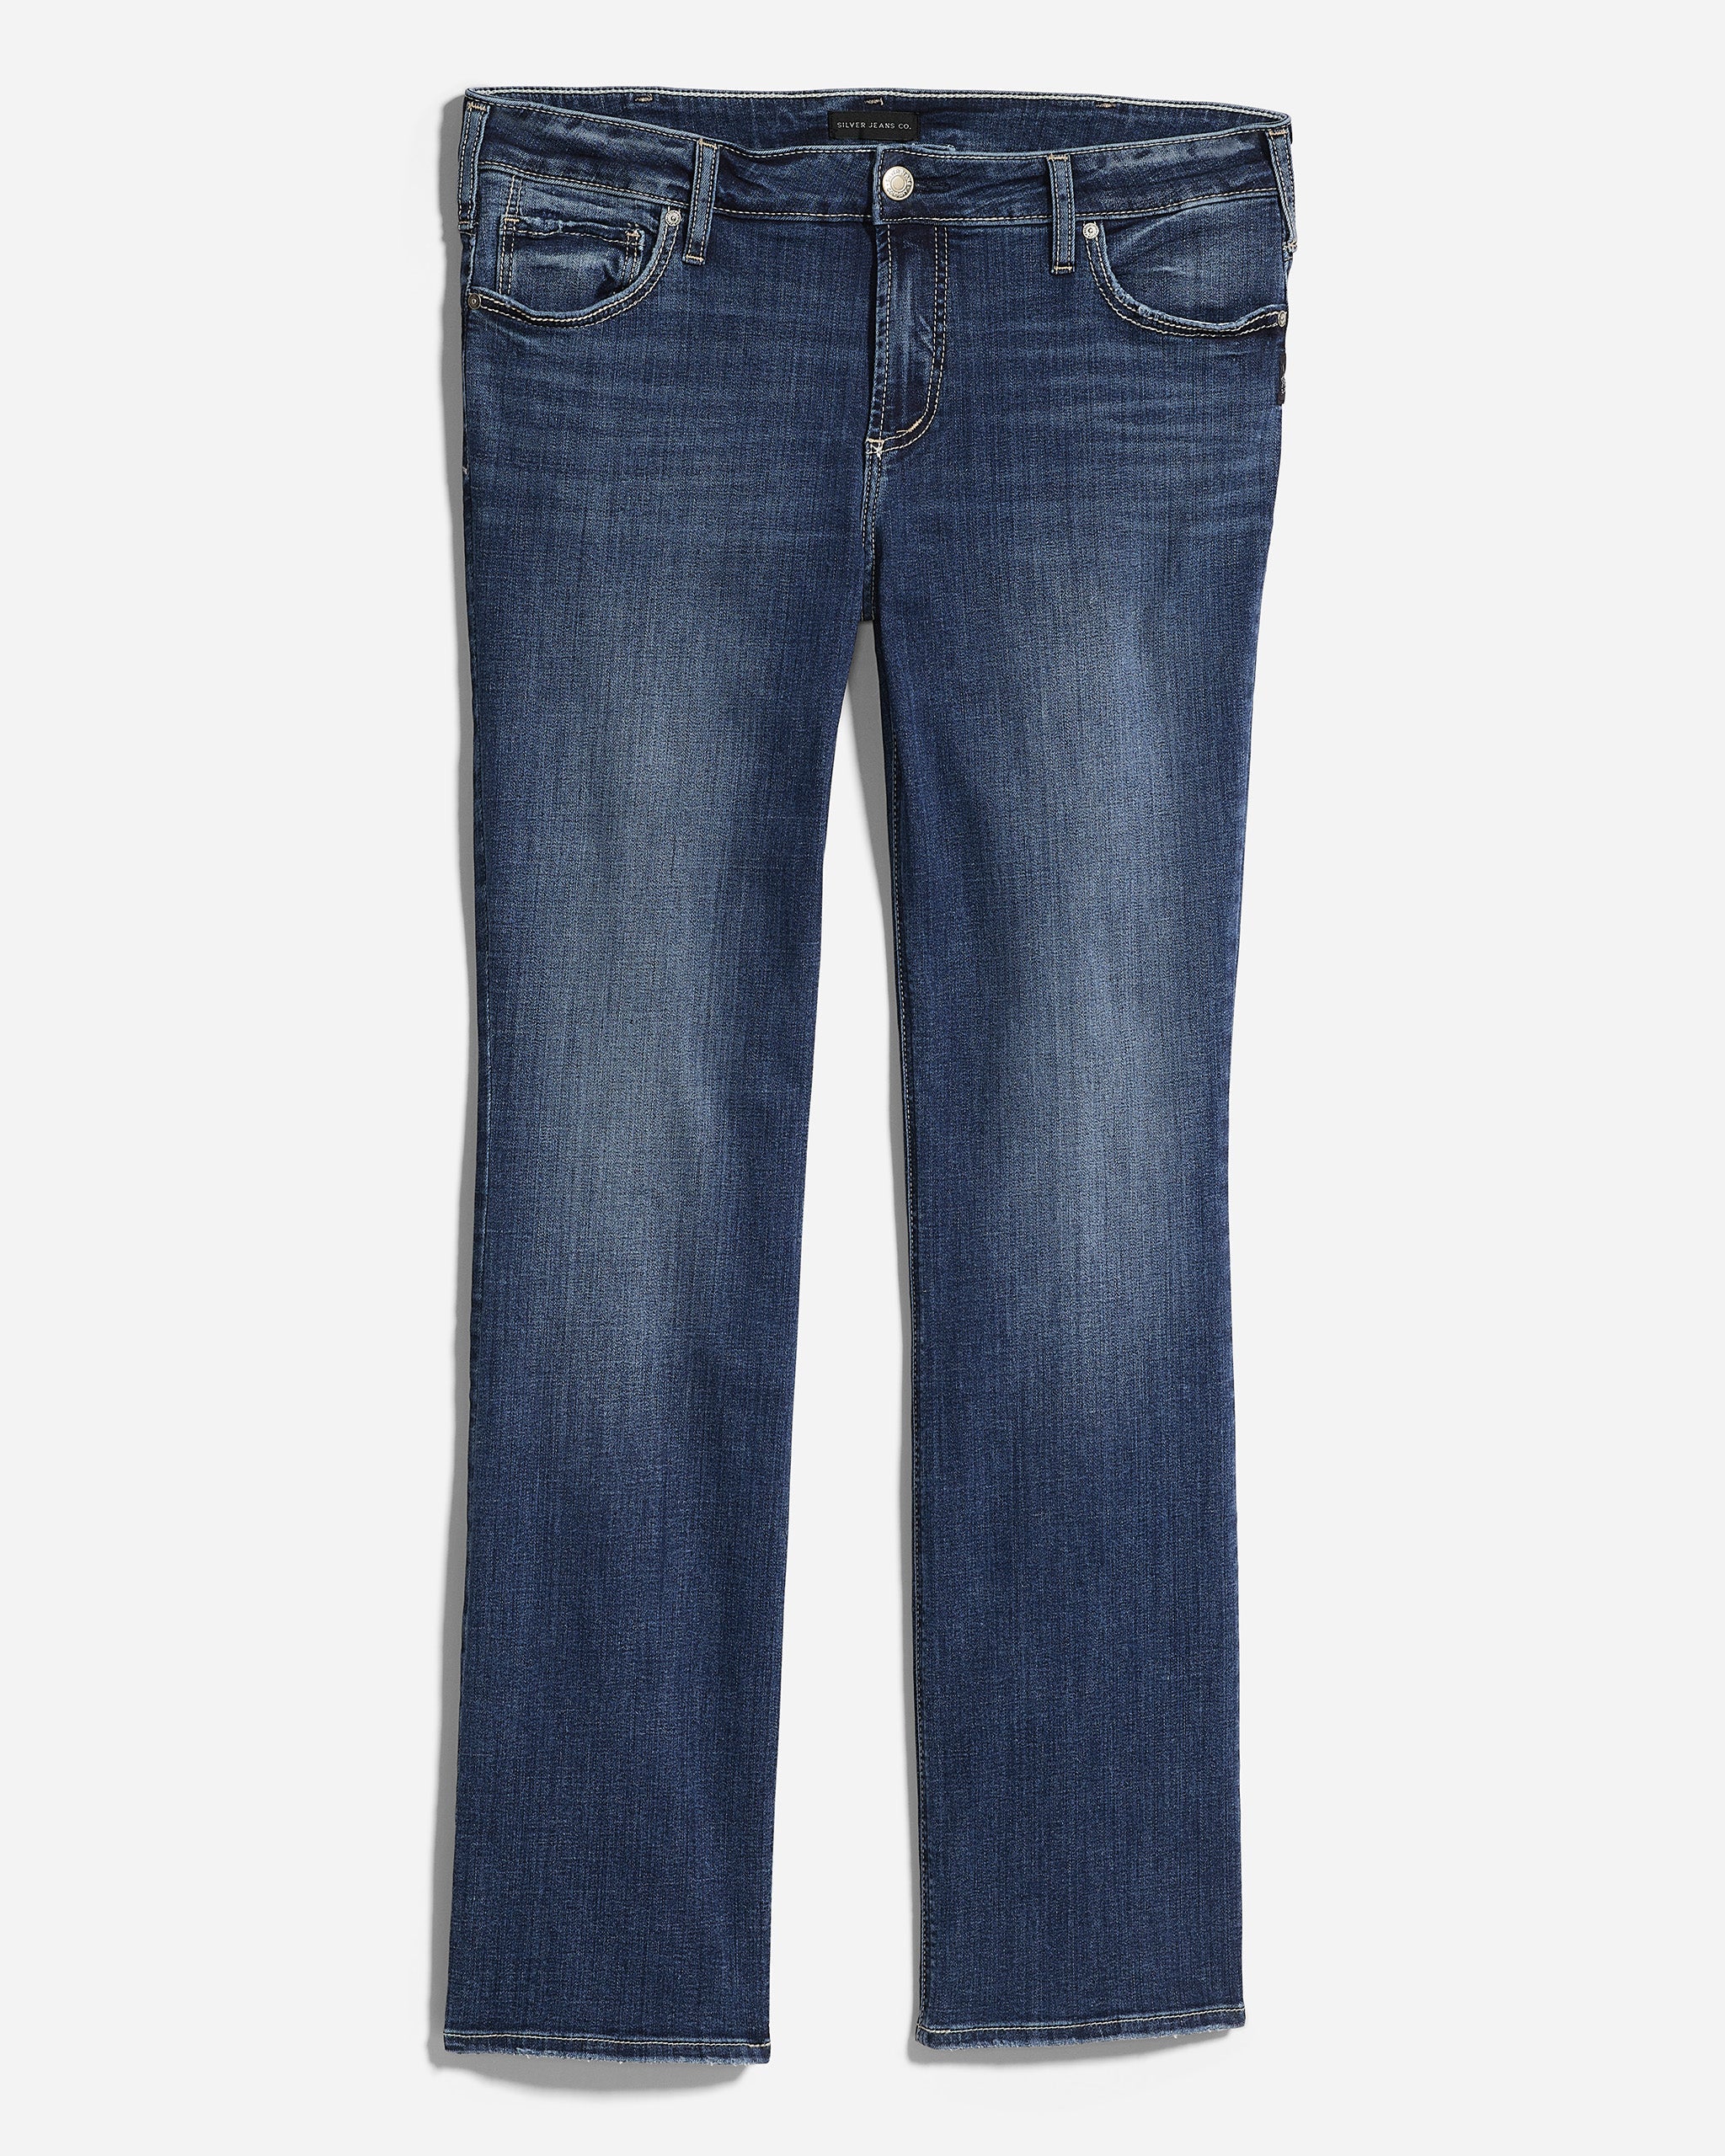 Silver Jeans Co. Gordie Loose Fit Washed Jeans